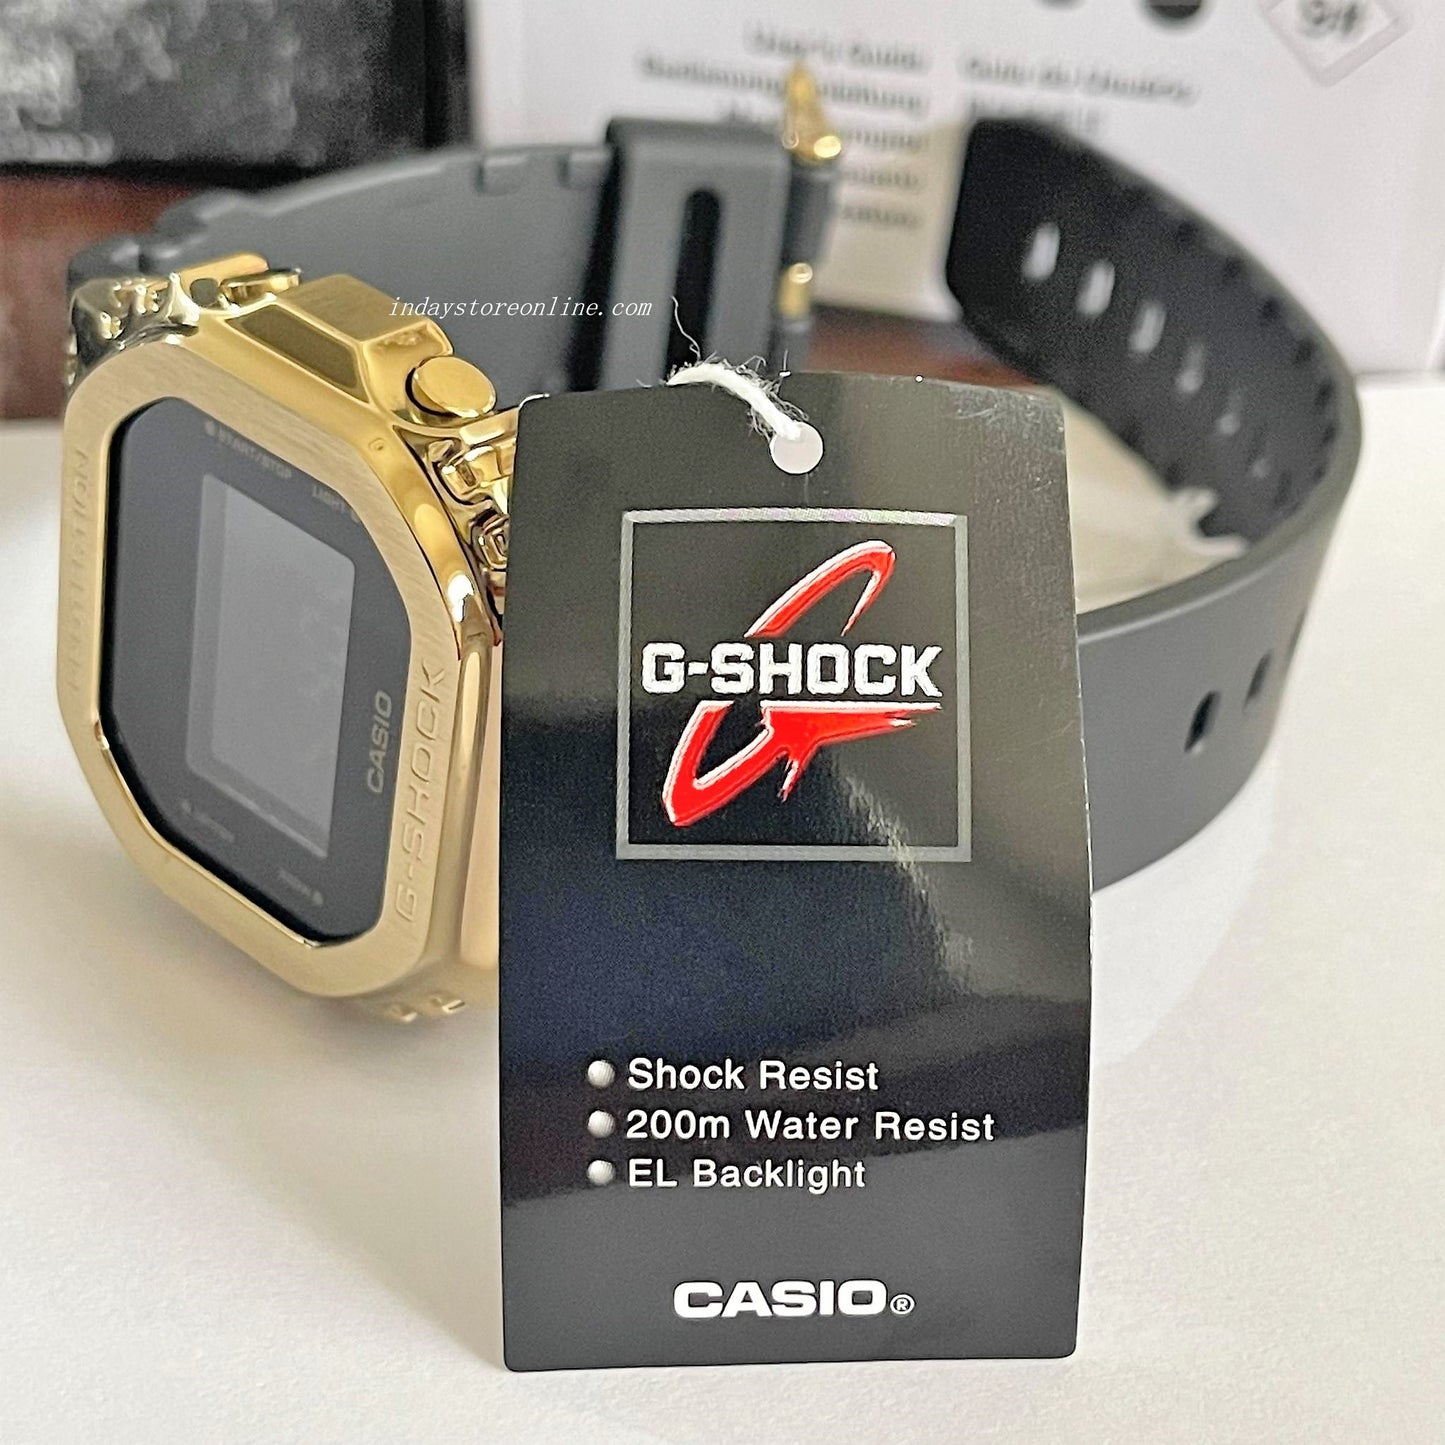 Casio G-Shock Men's Watch GM-5600G-9 Digital 5600 Series Black and Gold Color